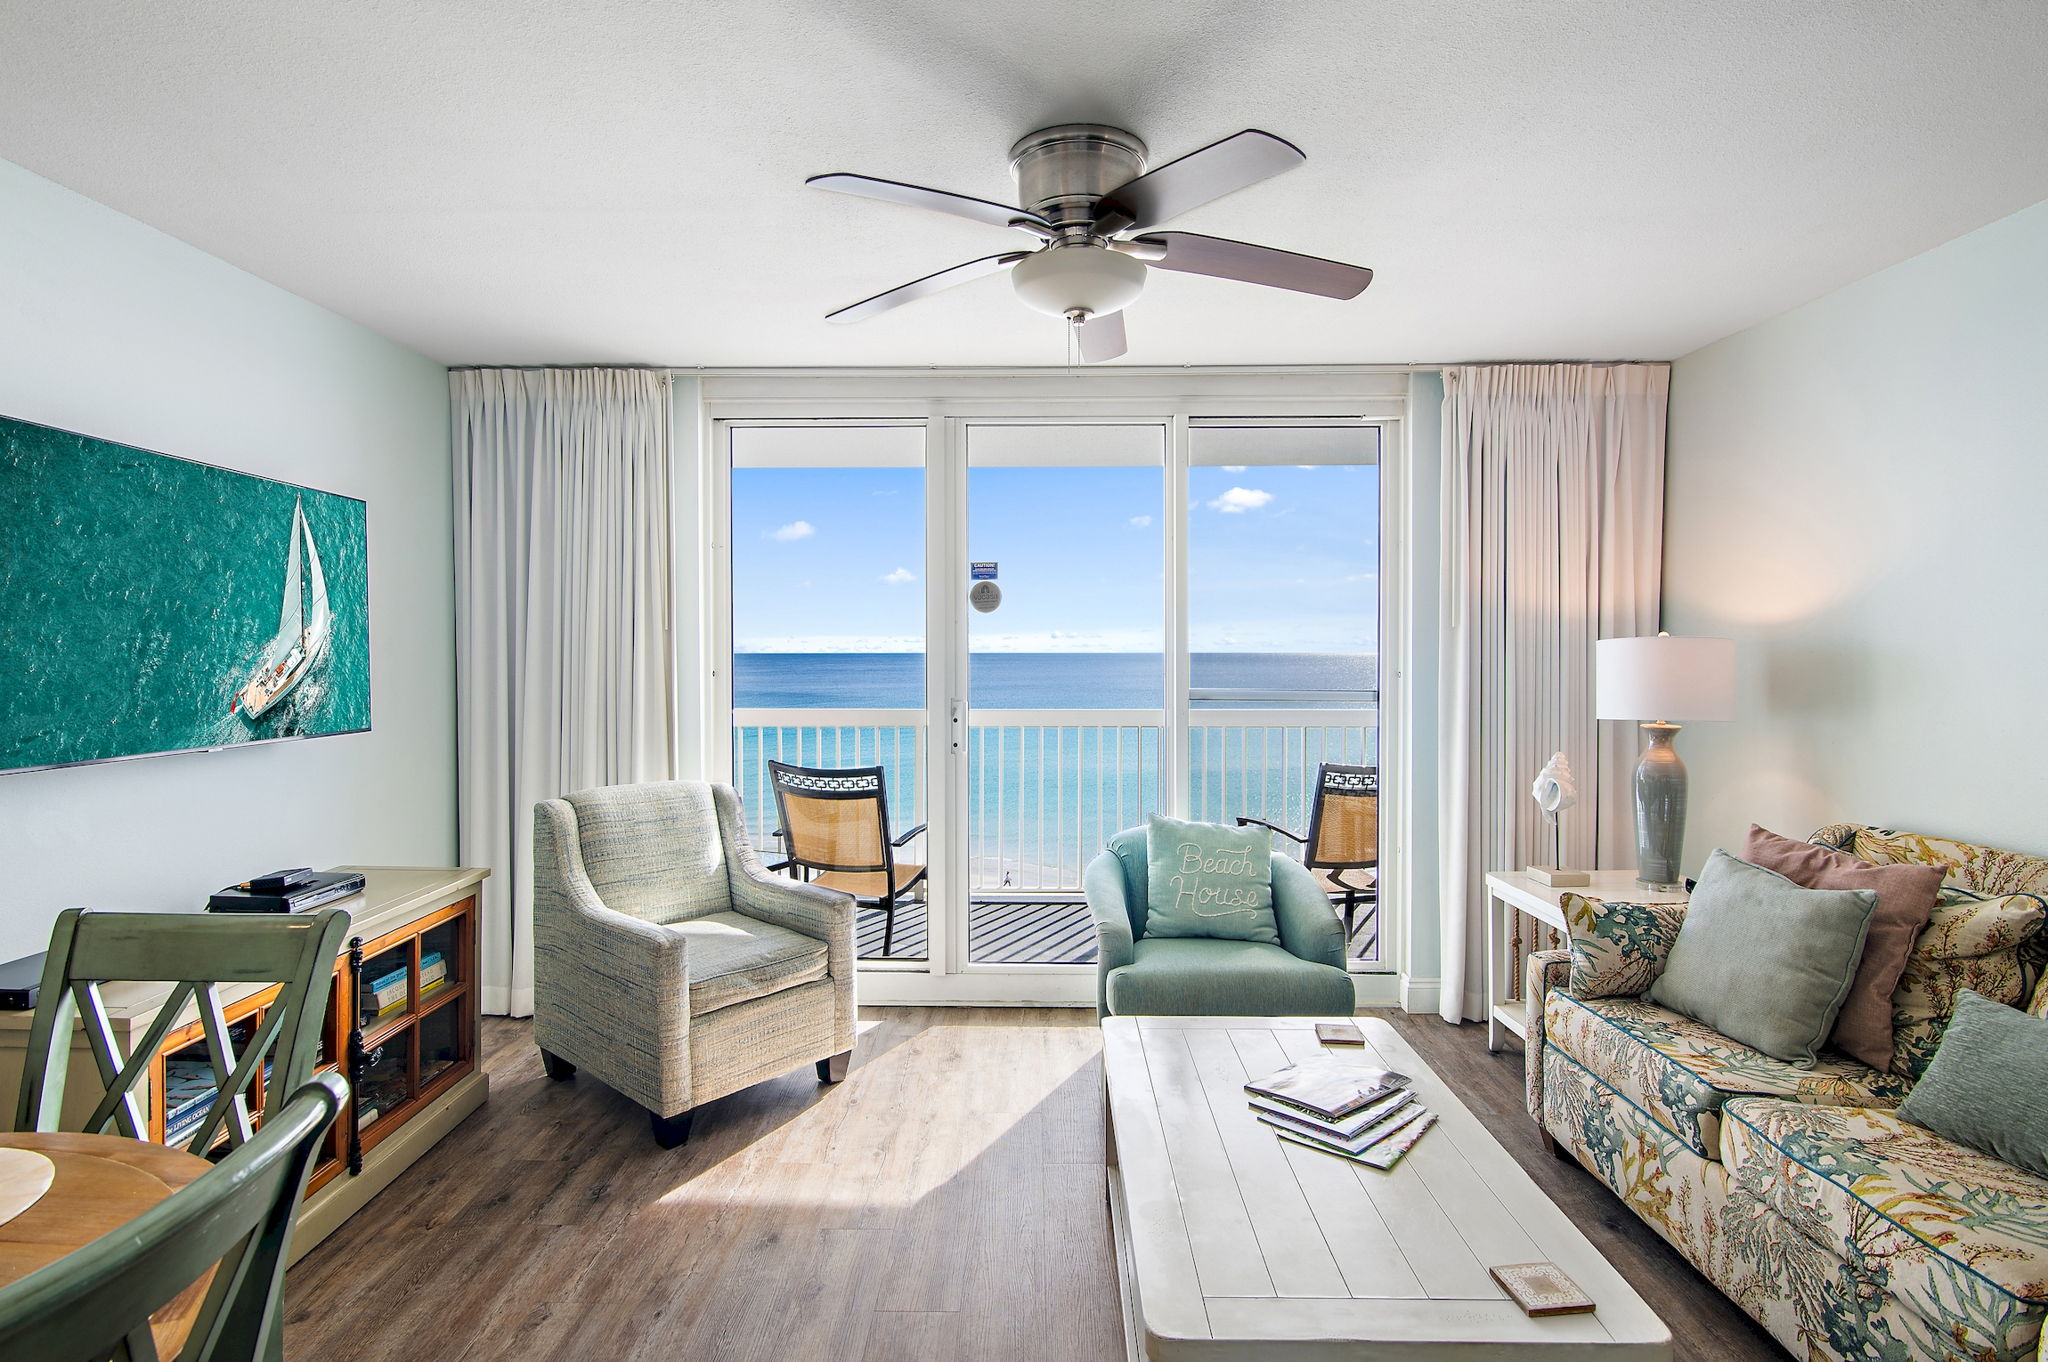 Beachfront Dreams: How to Find the Ideal Rental for Your Coastal Adventure